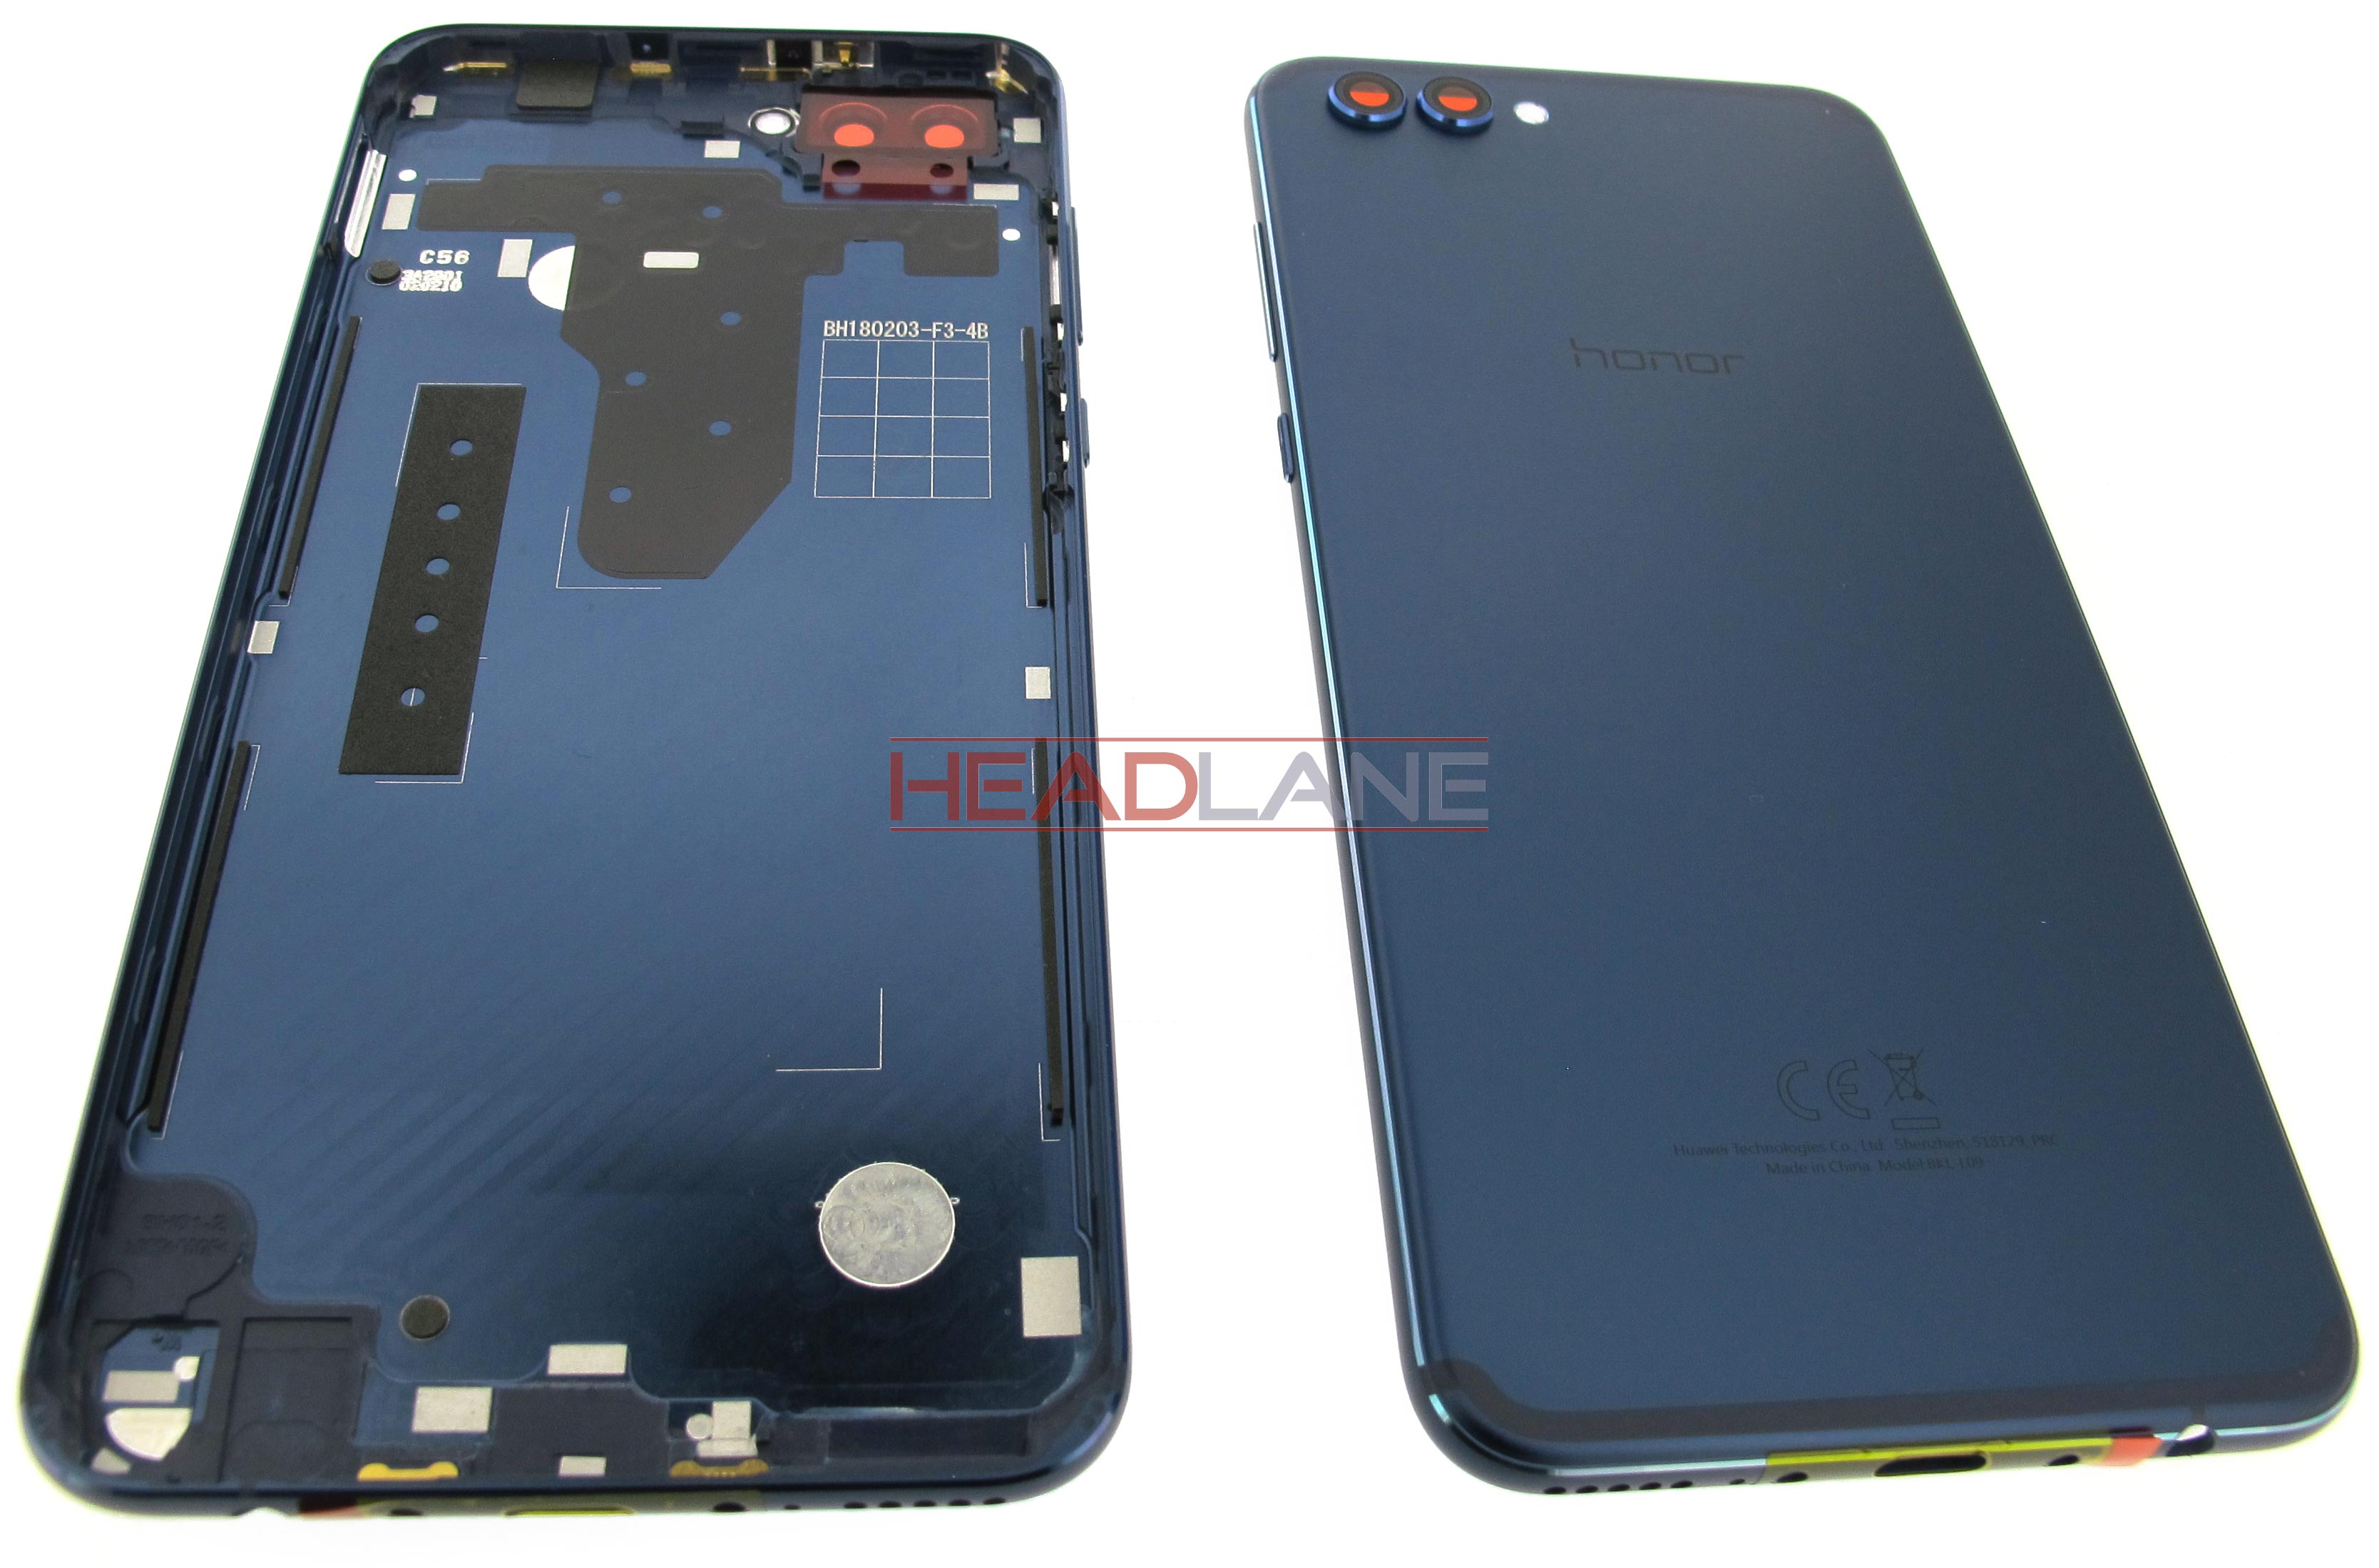 Huawei Honor View 10 Back / Battery Cover - Blue